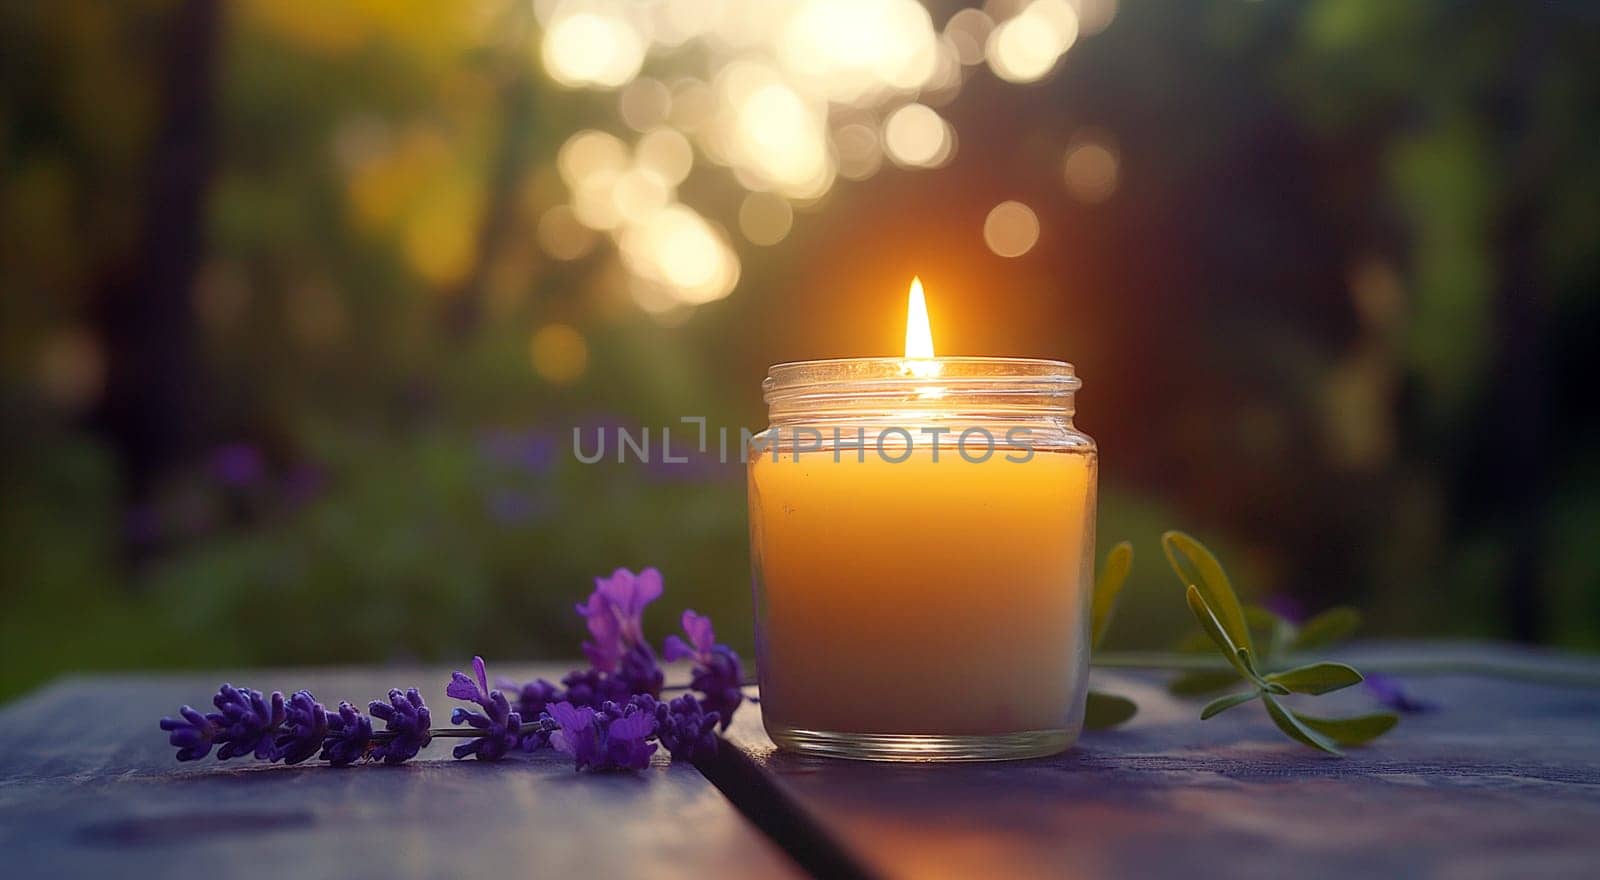 A lit candle in a jar with lavender flowers nearby, against the backdrop of a dreamy sunset. High quality photo